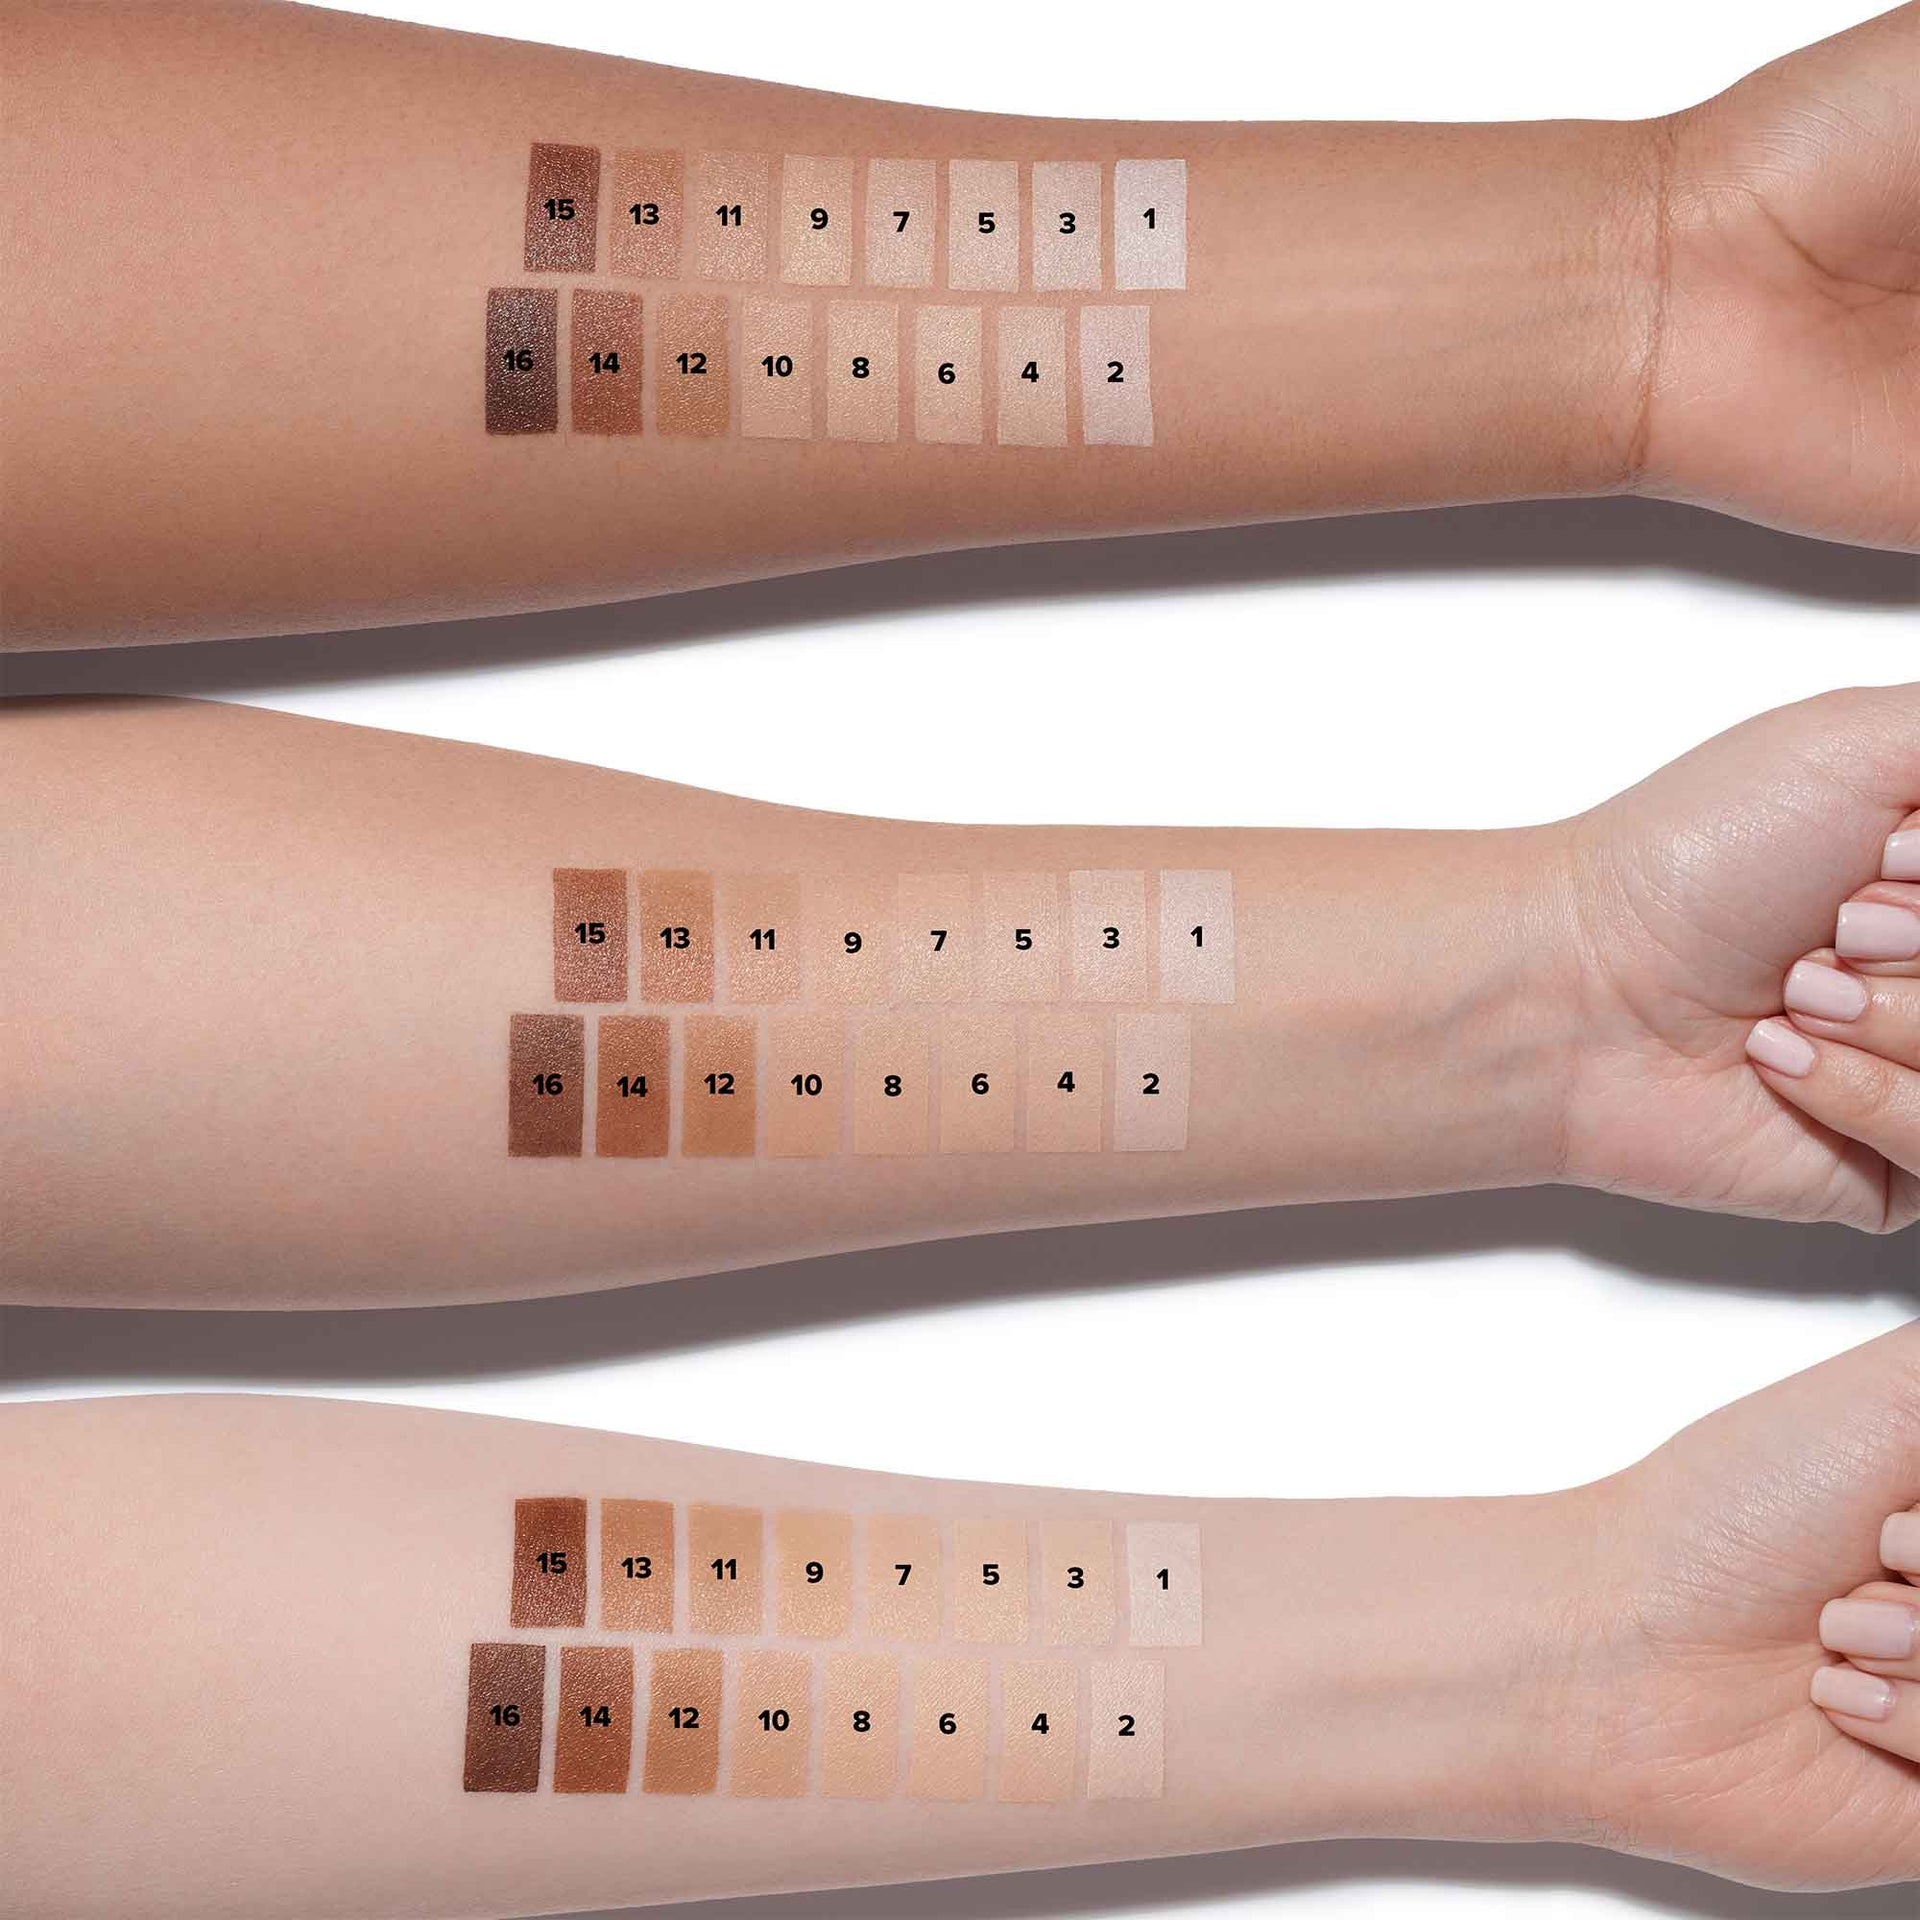 Beauty Balm Serum Boosted Skin Tint Arm Swatch